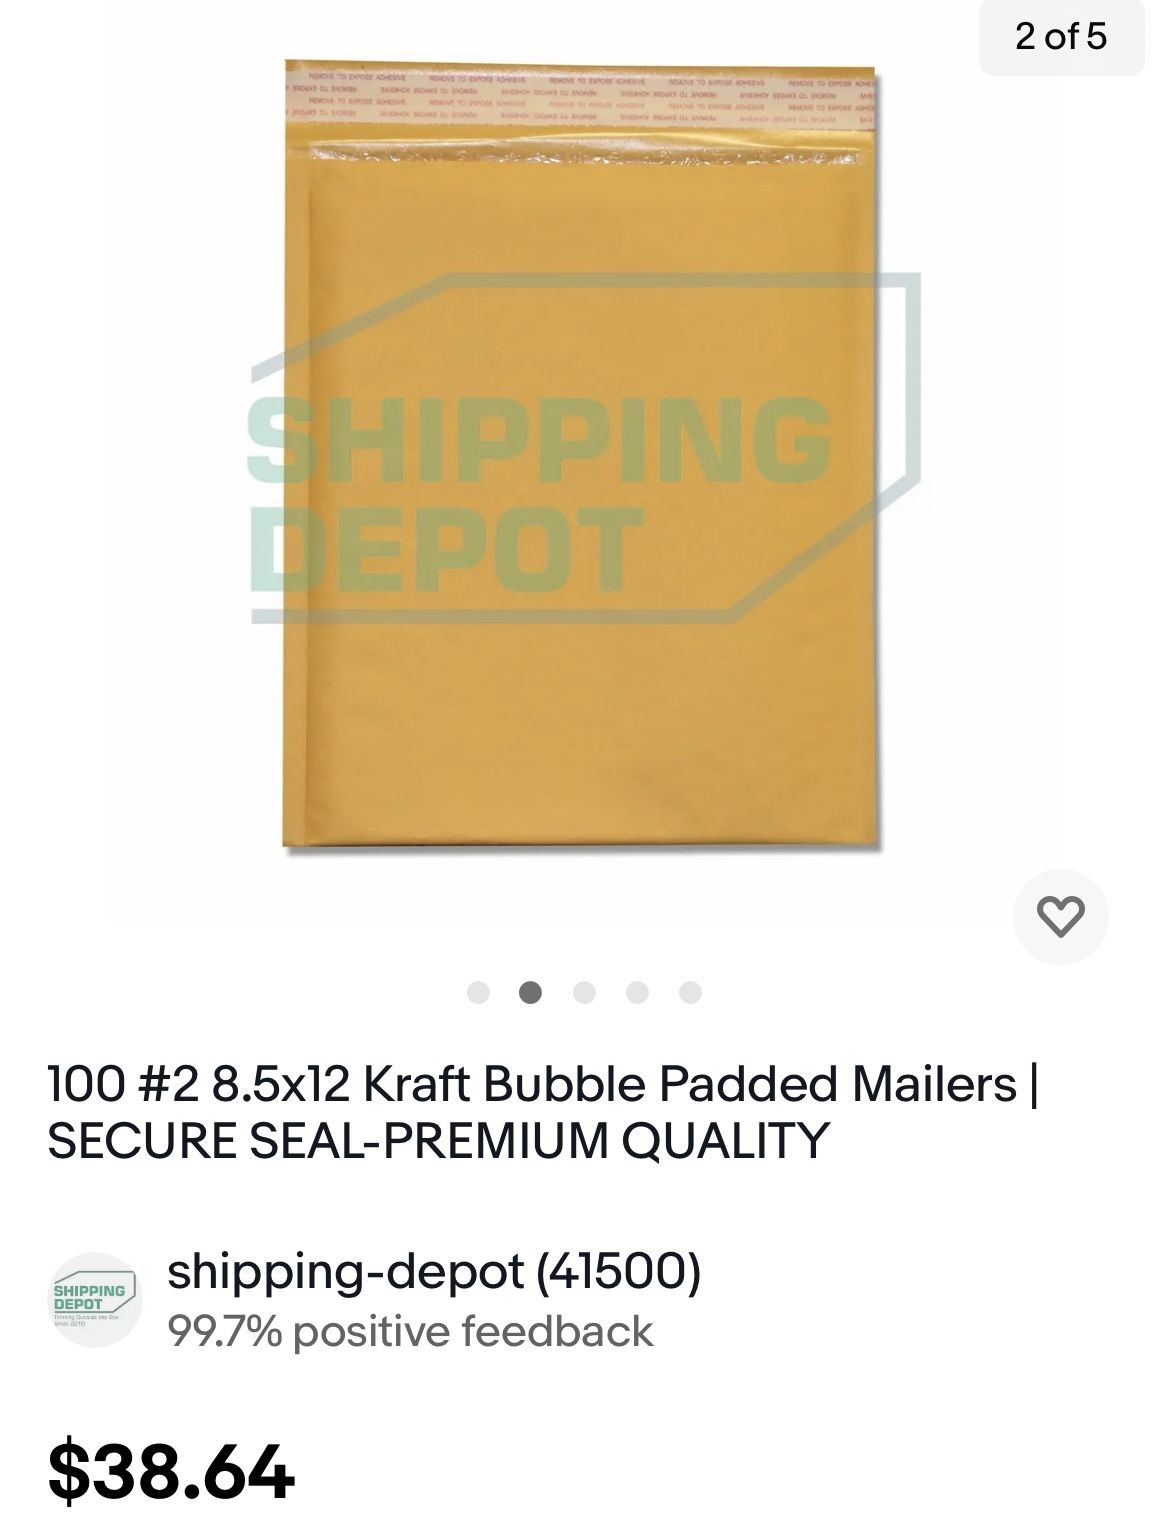 100 #2 8.5x12 Kraft Bubble Mailers - Brand New In Box 